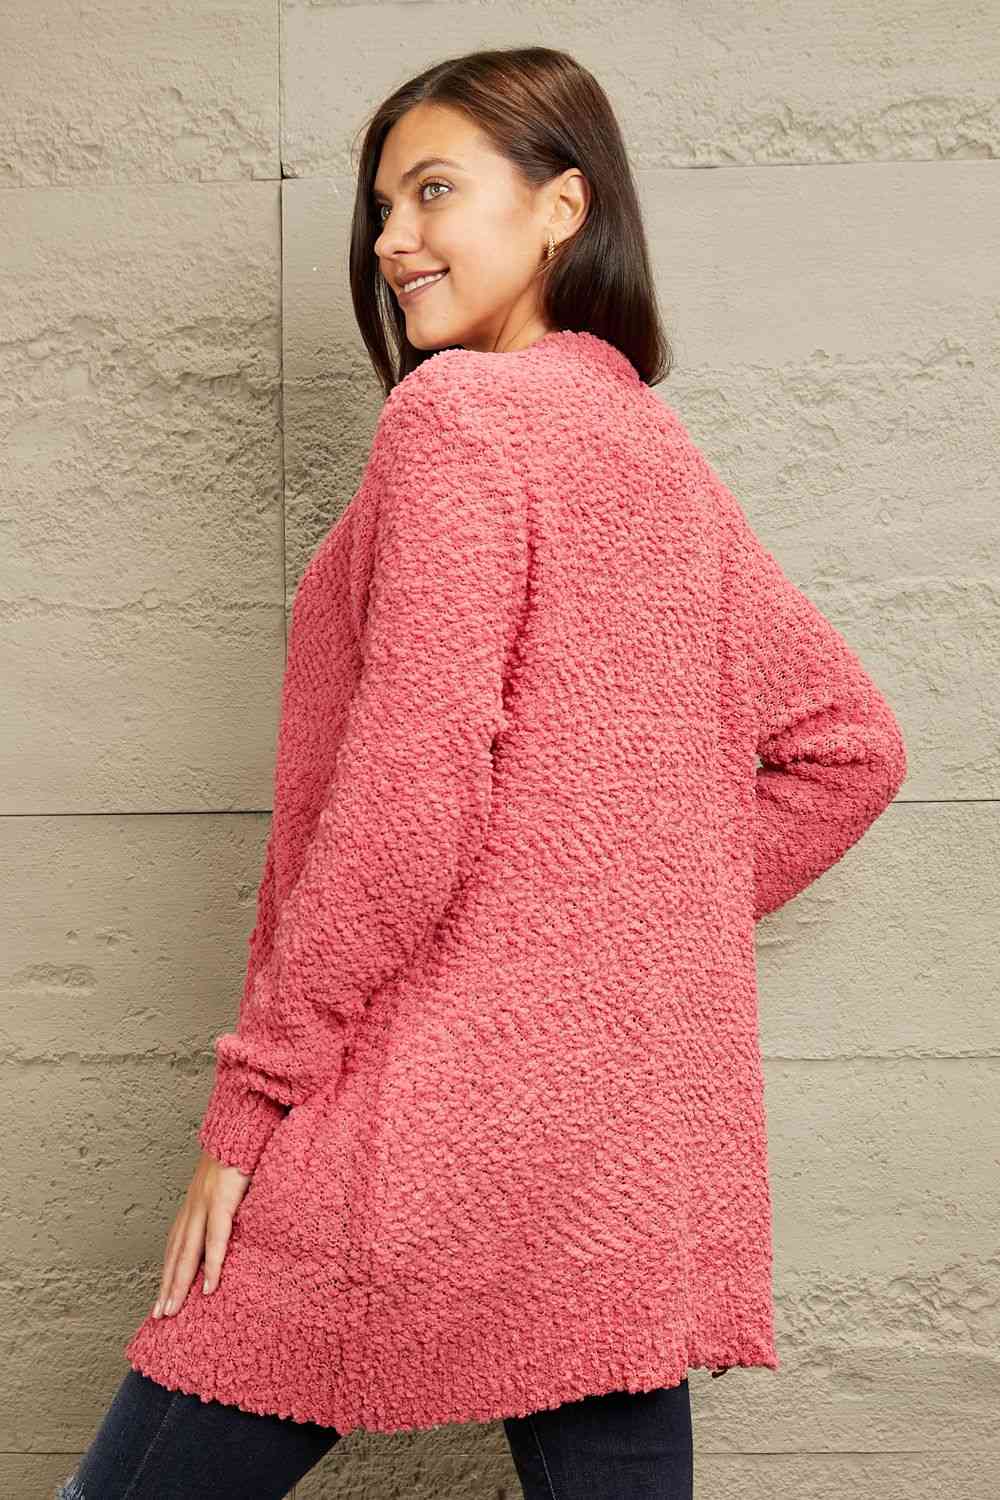 Falling For You Full Size Open Front Popcorn Cardigan - Coco and lulu boutique 